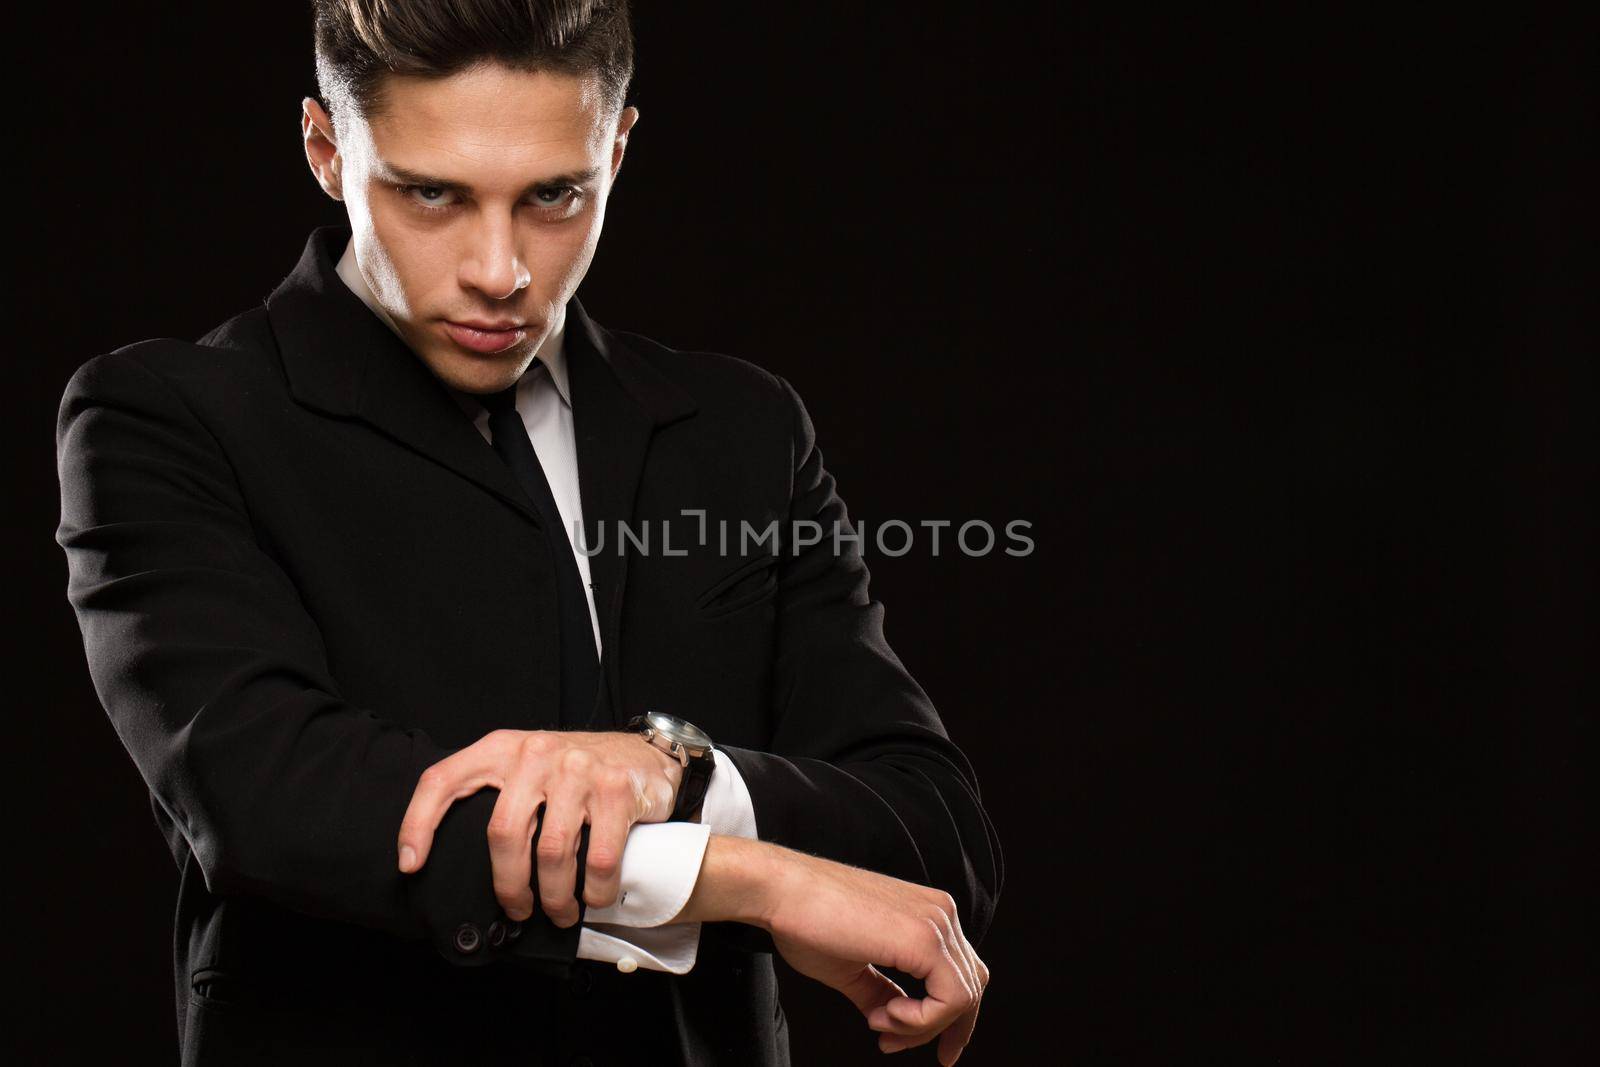 Profesional bodyguard wearing black suit and tie rolling up his sleeves aggressively preparing to fight on black background copyspace protection safety profession brutality masculinity conflict